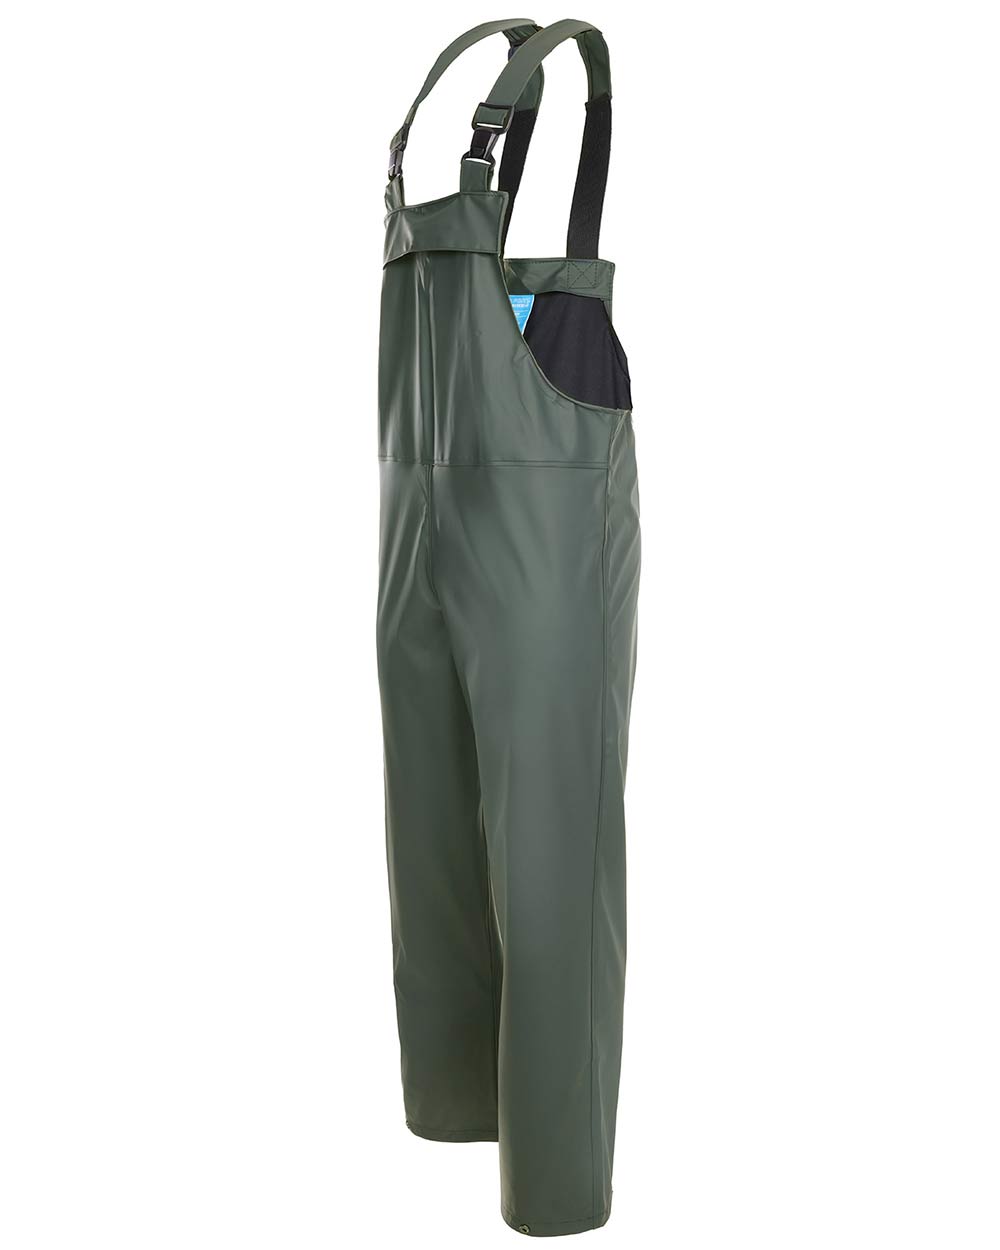 Olive coloured Fort Airflex Waterproof Breathable Bib and Brace Overalls on white background 